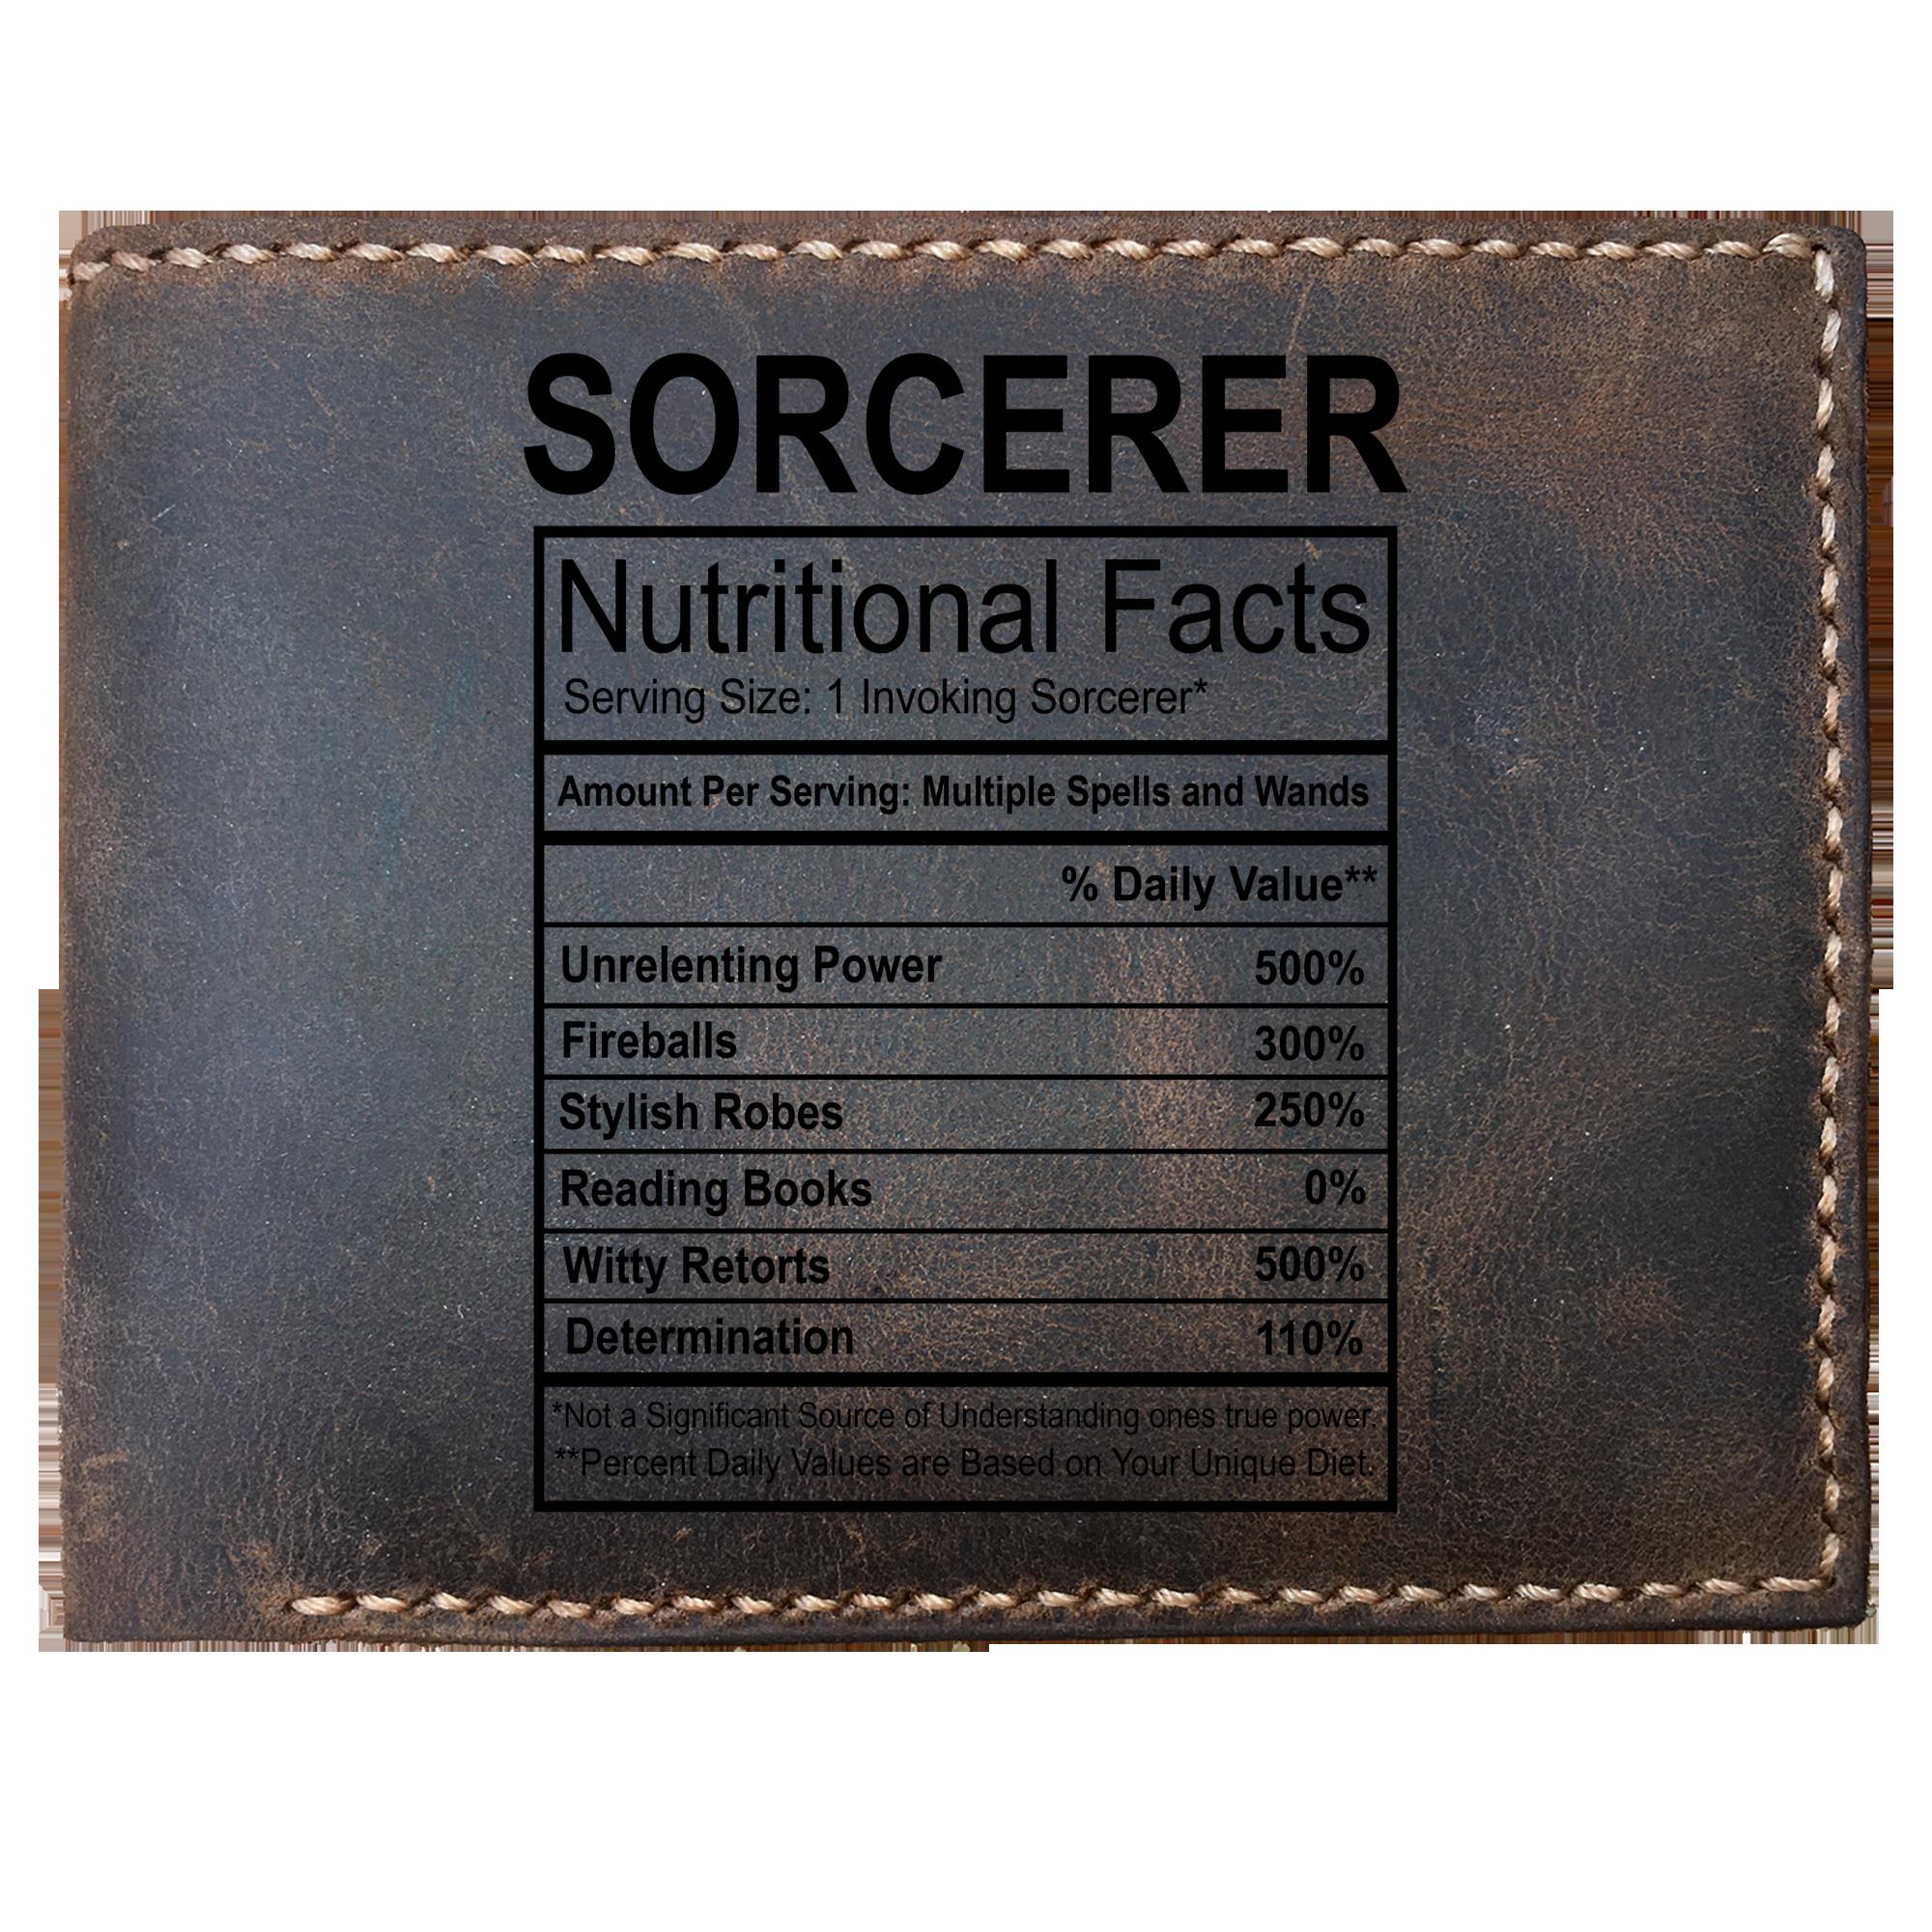 Skitongifts Funny Custom Laser Engraved Bifold Leather Wallet For Men, Sorcerer Nutritional Facts